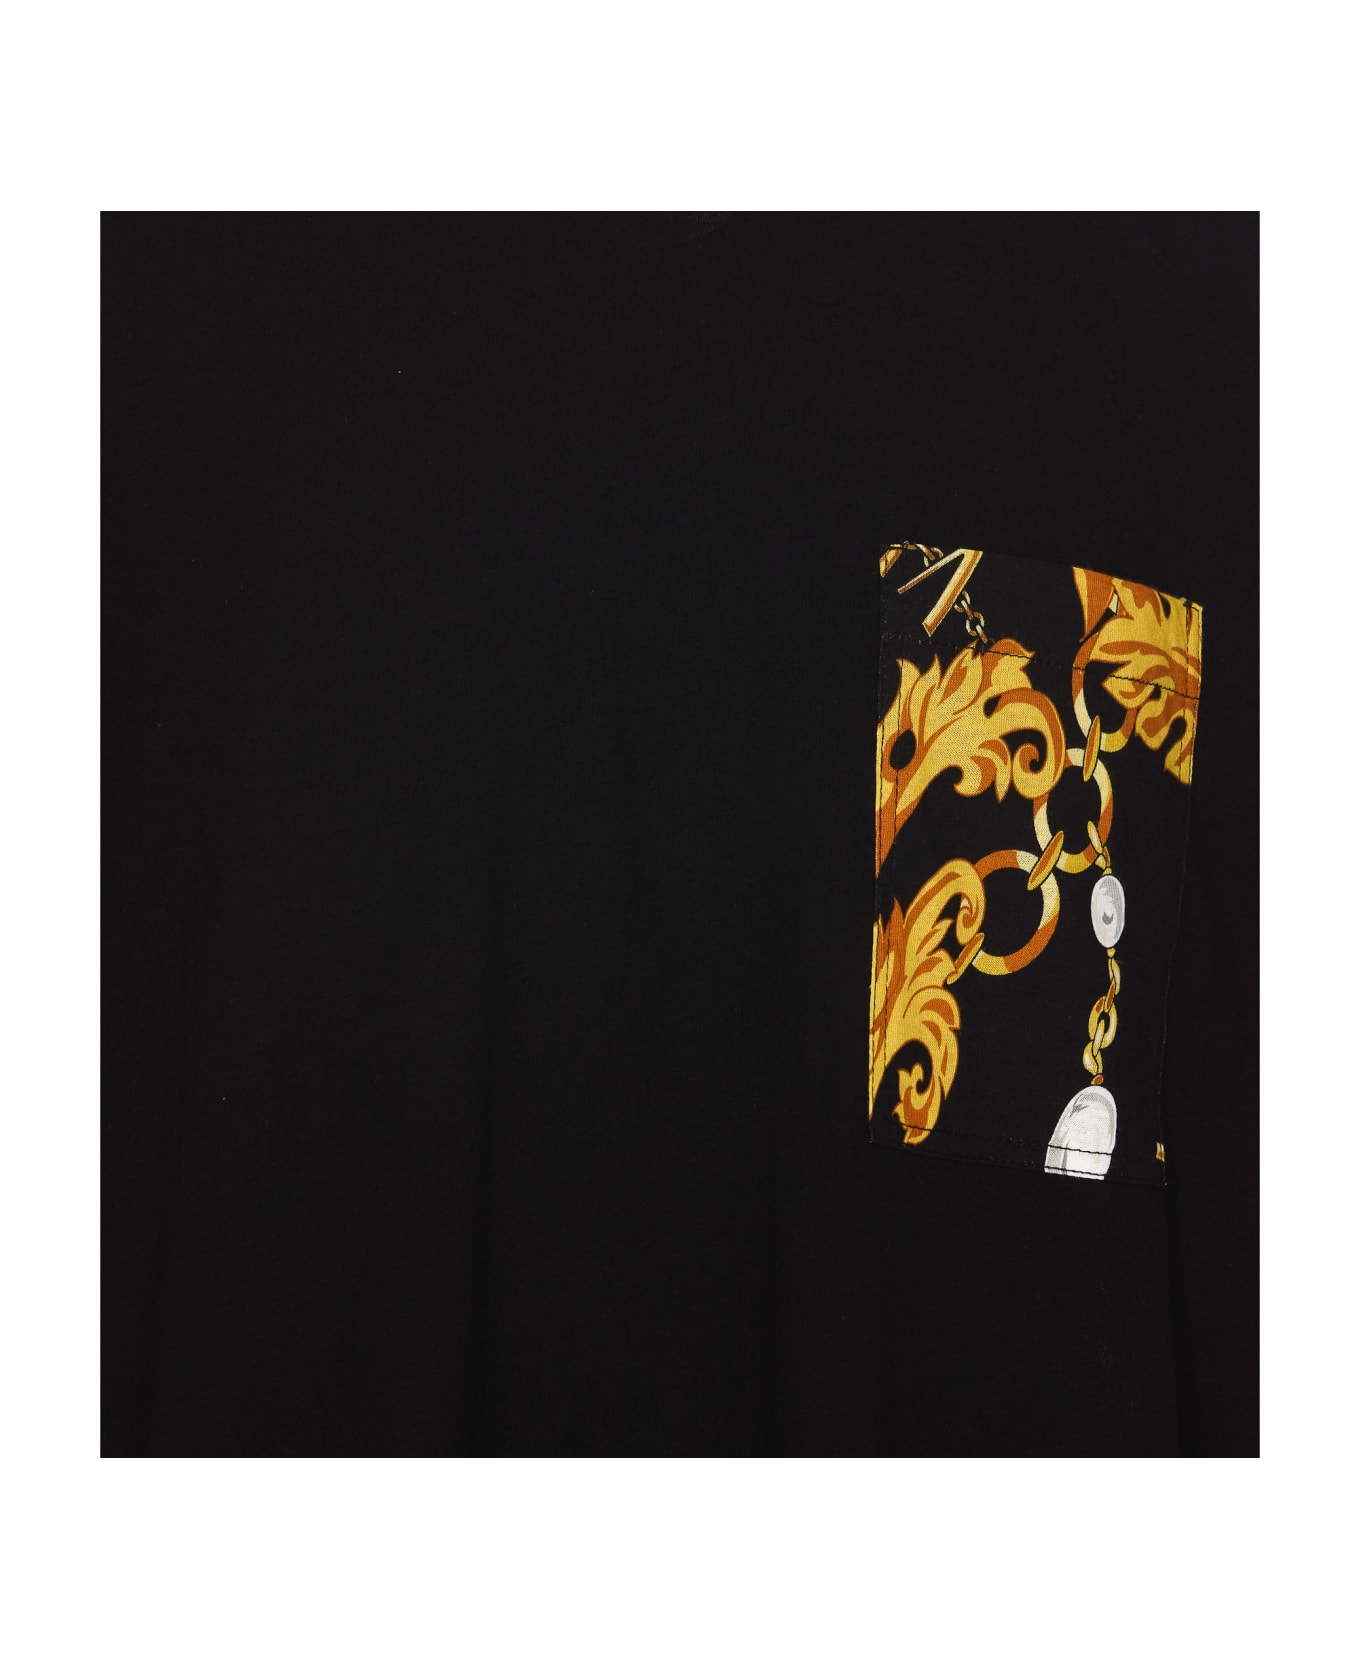 Versace Jeans Couture Chain Couture Print T-shirt - Black Gold シャツ